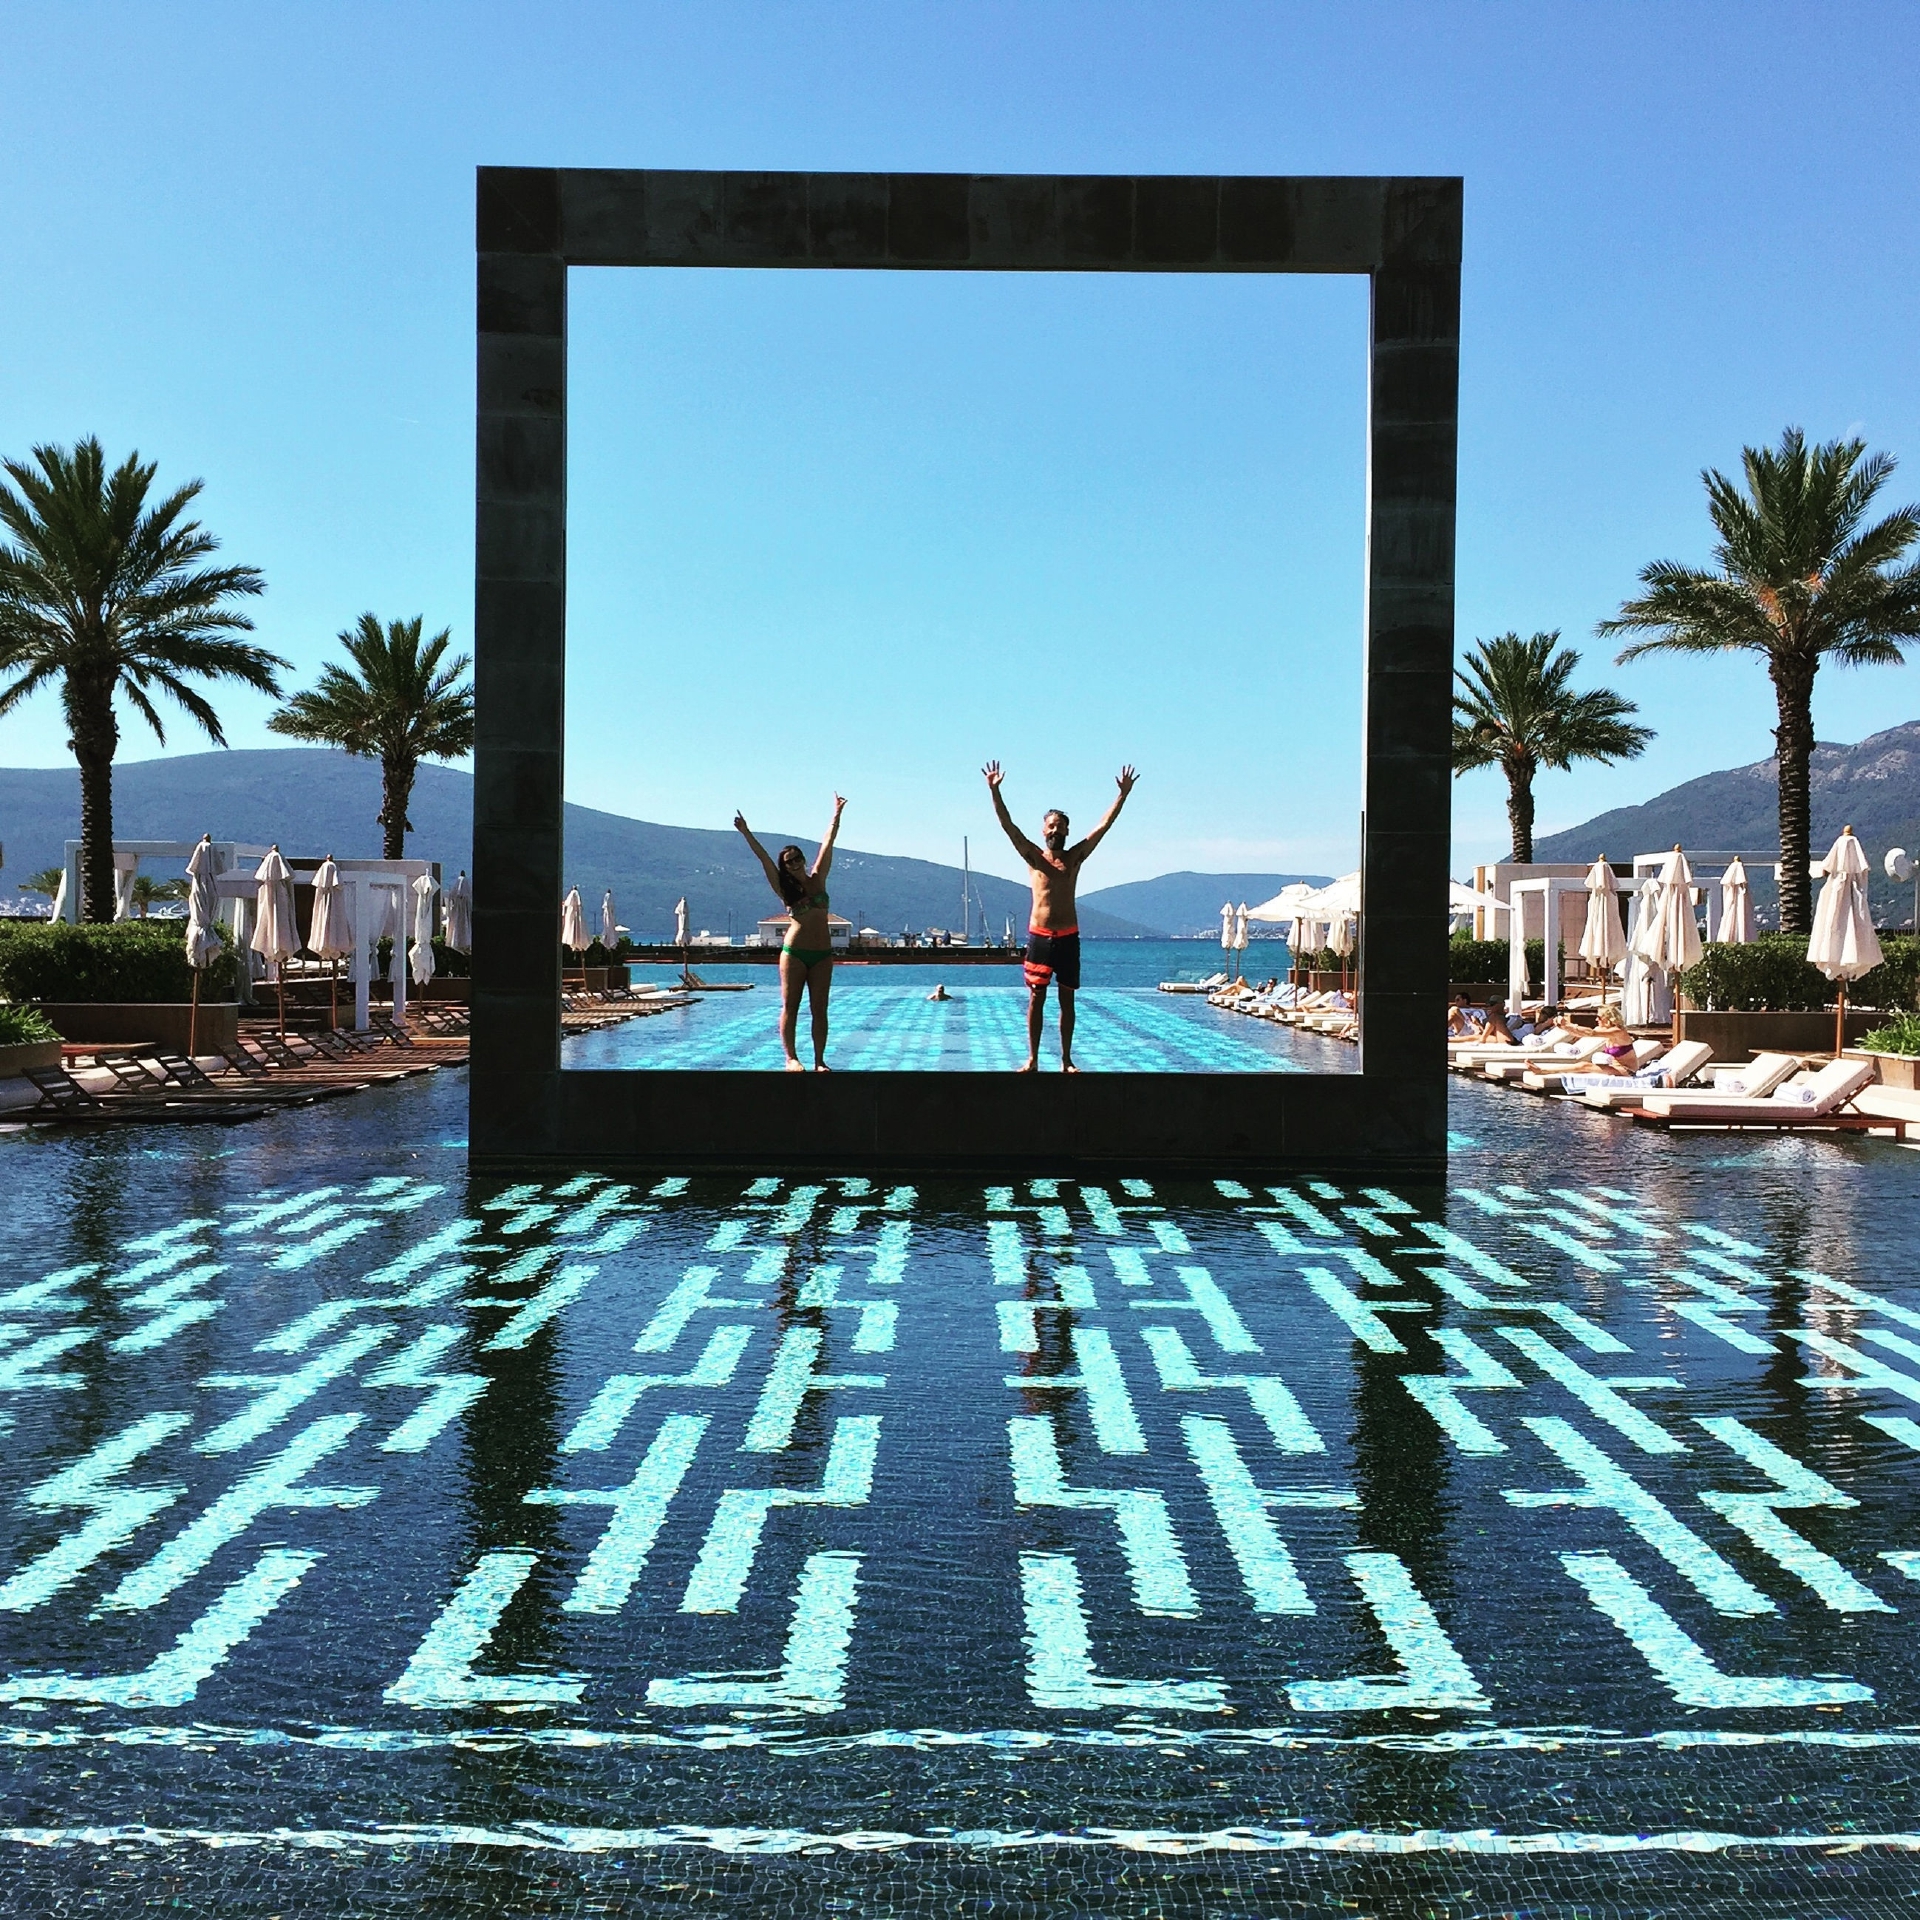 Jade (left) in the pool at the Porto Montenegro Yacht Club.